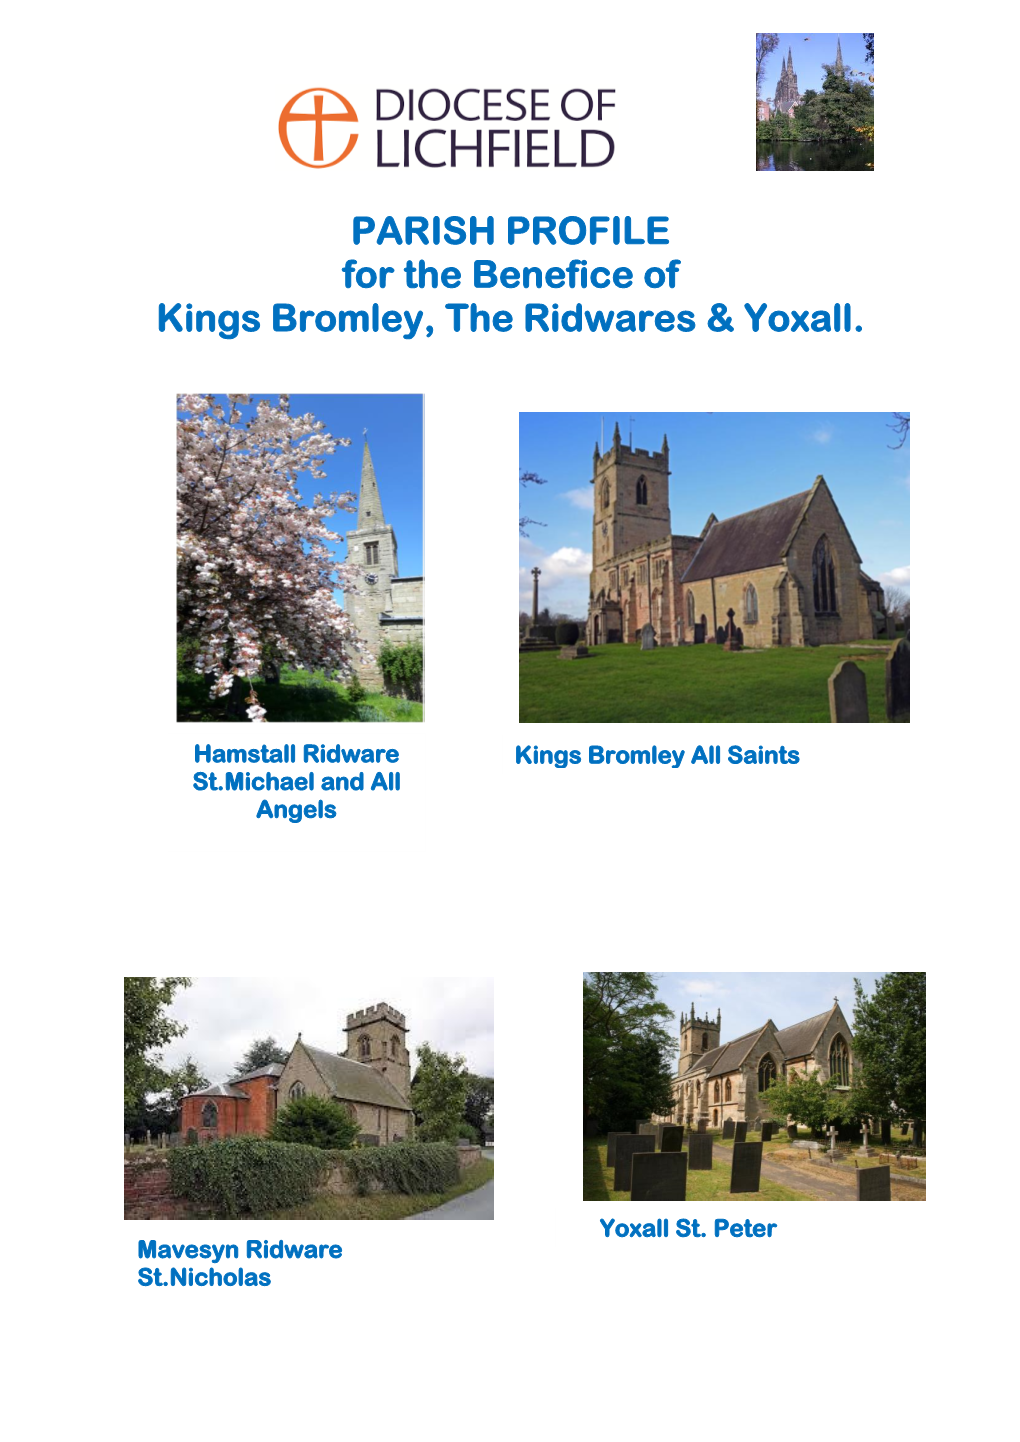 PARISH PROFILE for the Benefice of Kings Bromley, the Ridwares & Yoxall